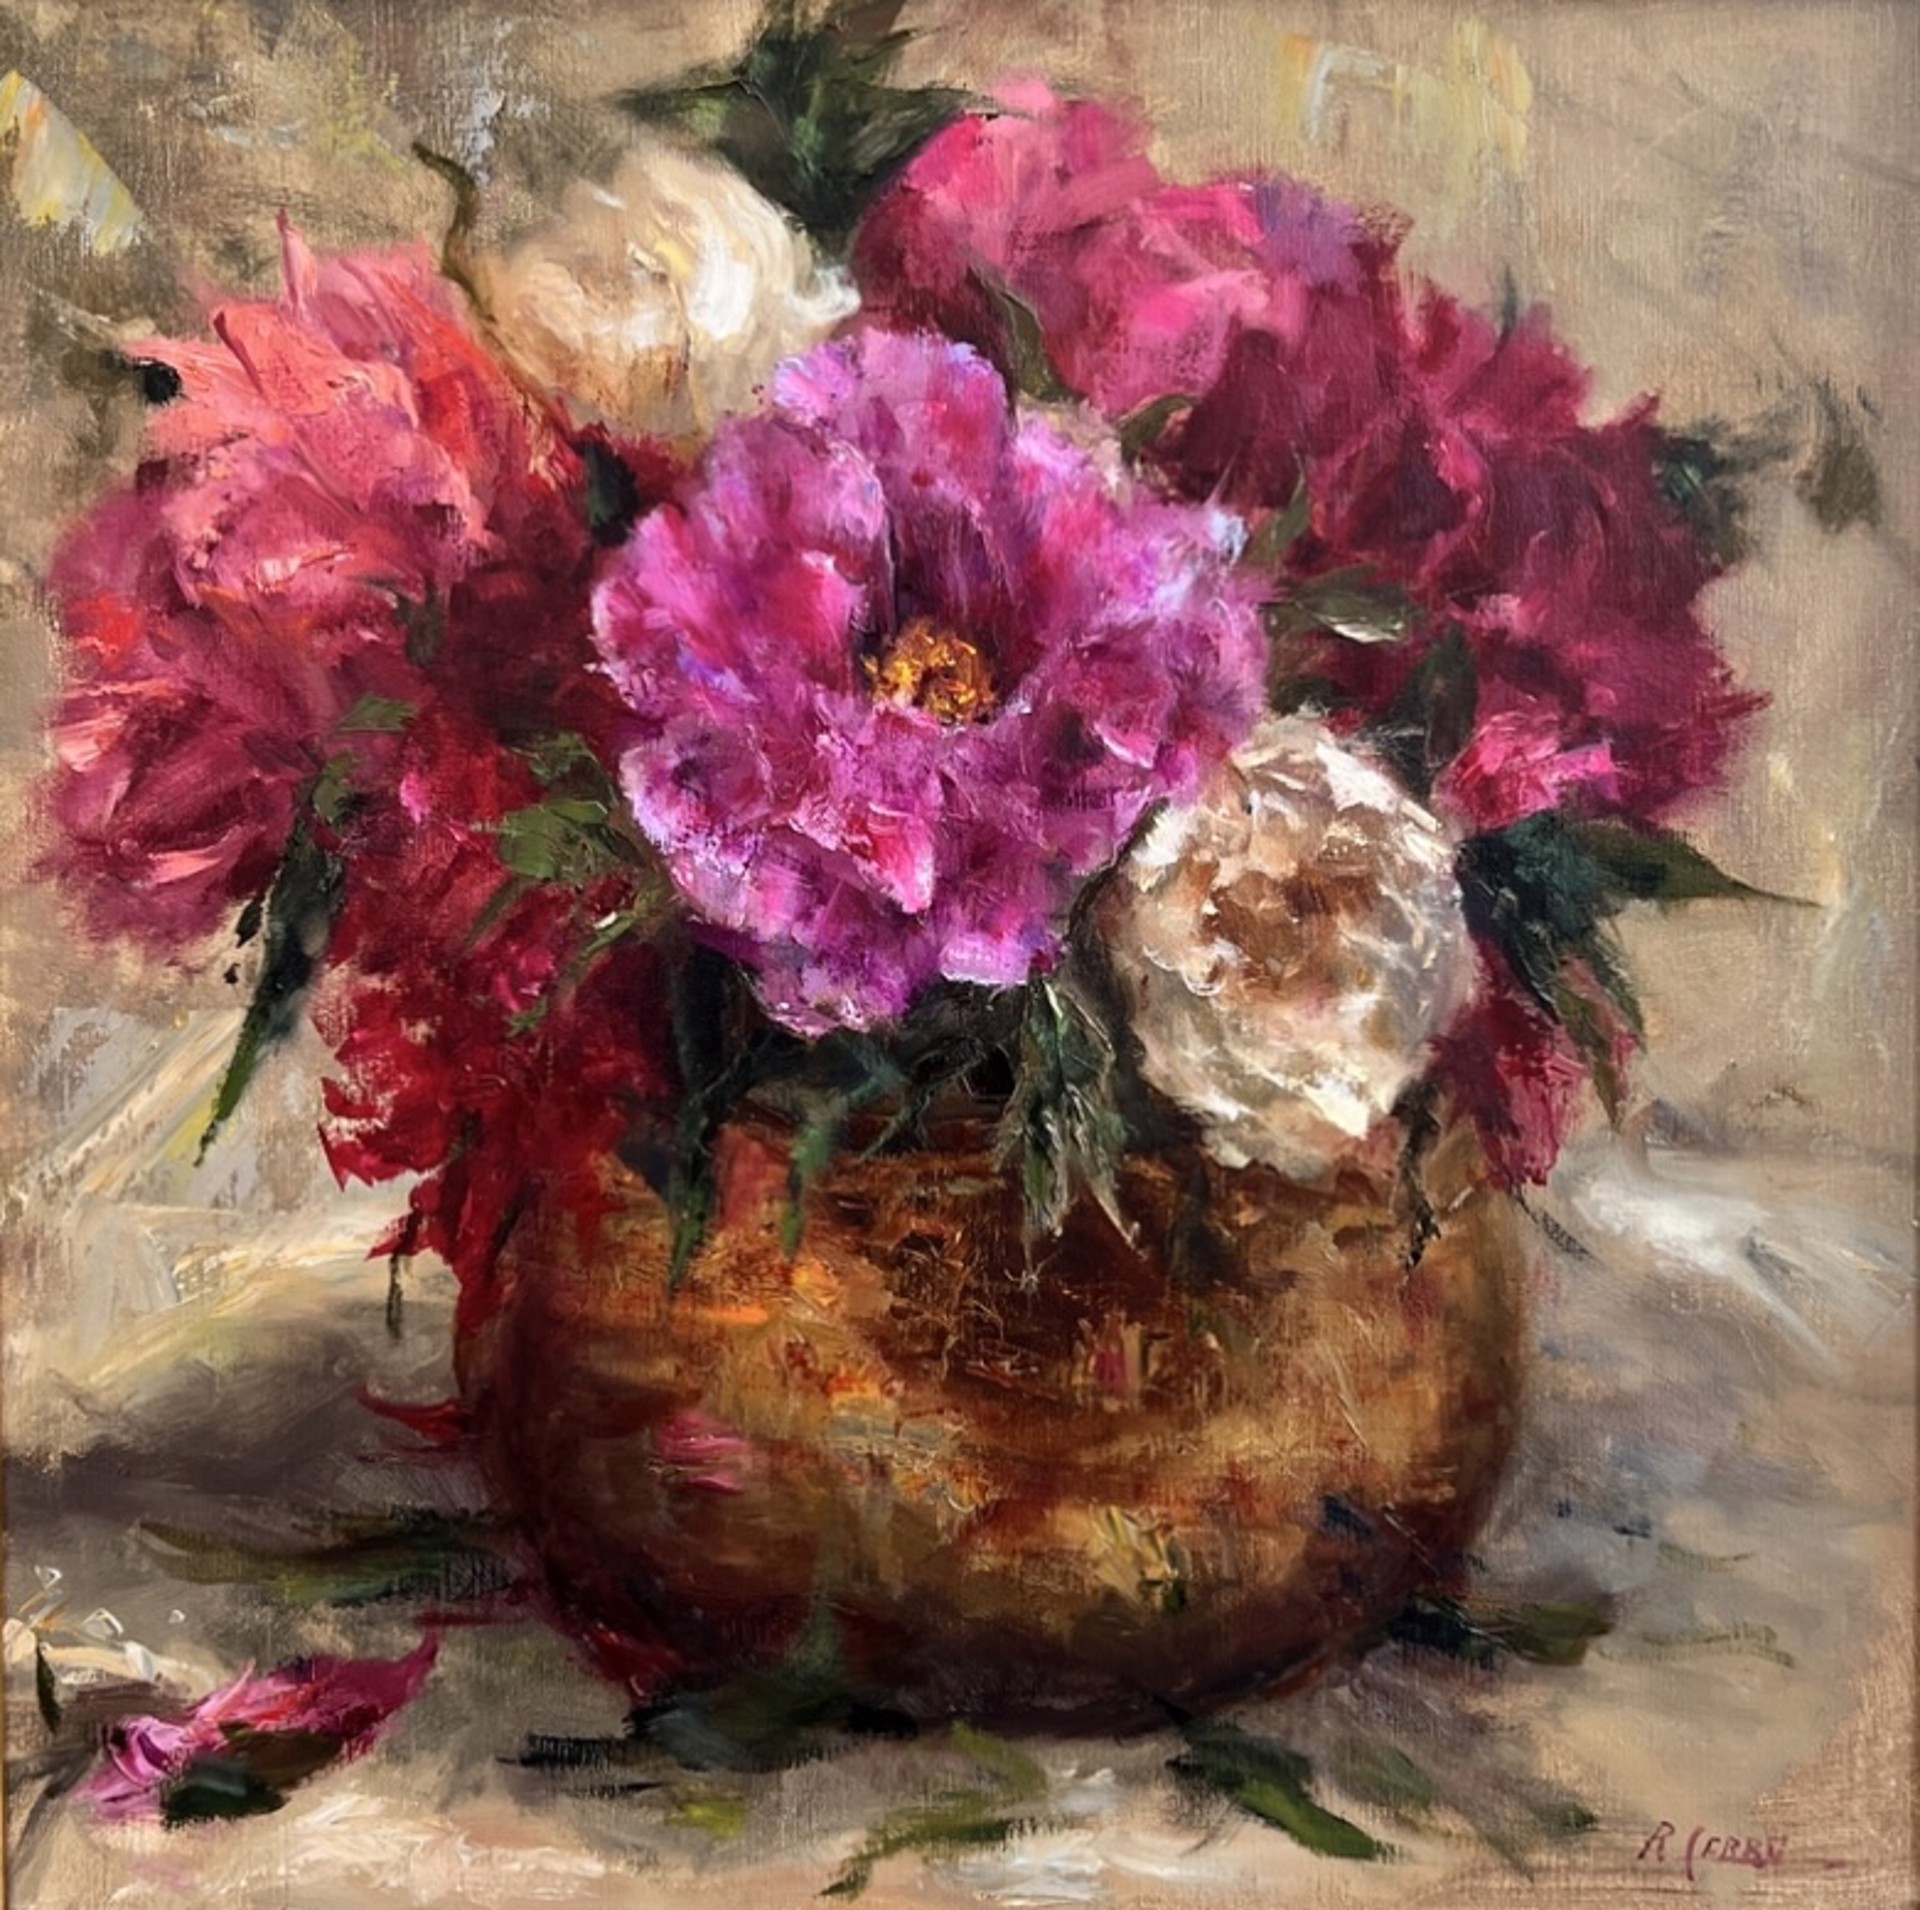 "Smell Those Peonies" original oil painting by Rosanne Cerbo